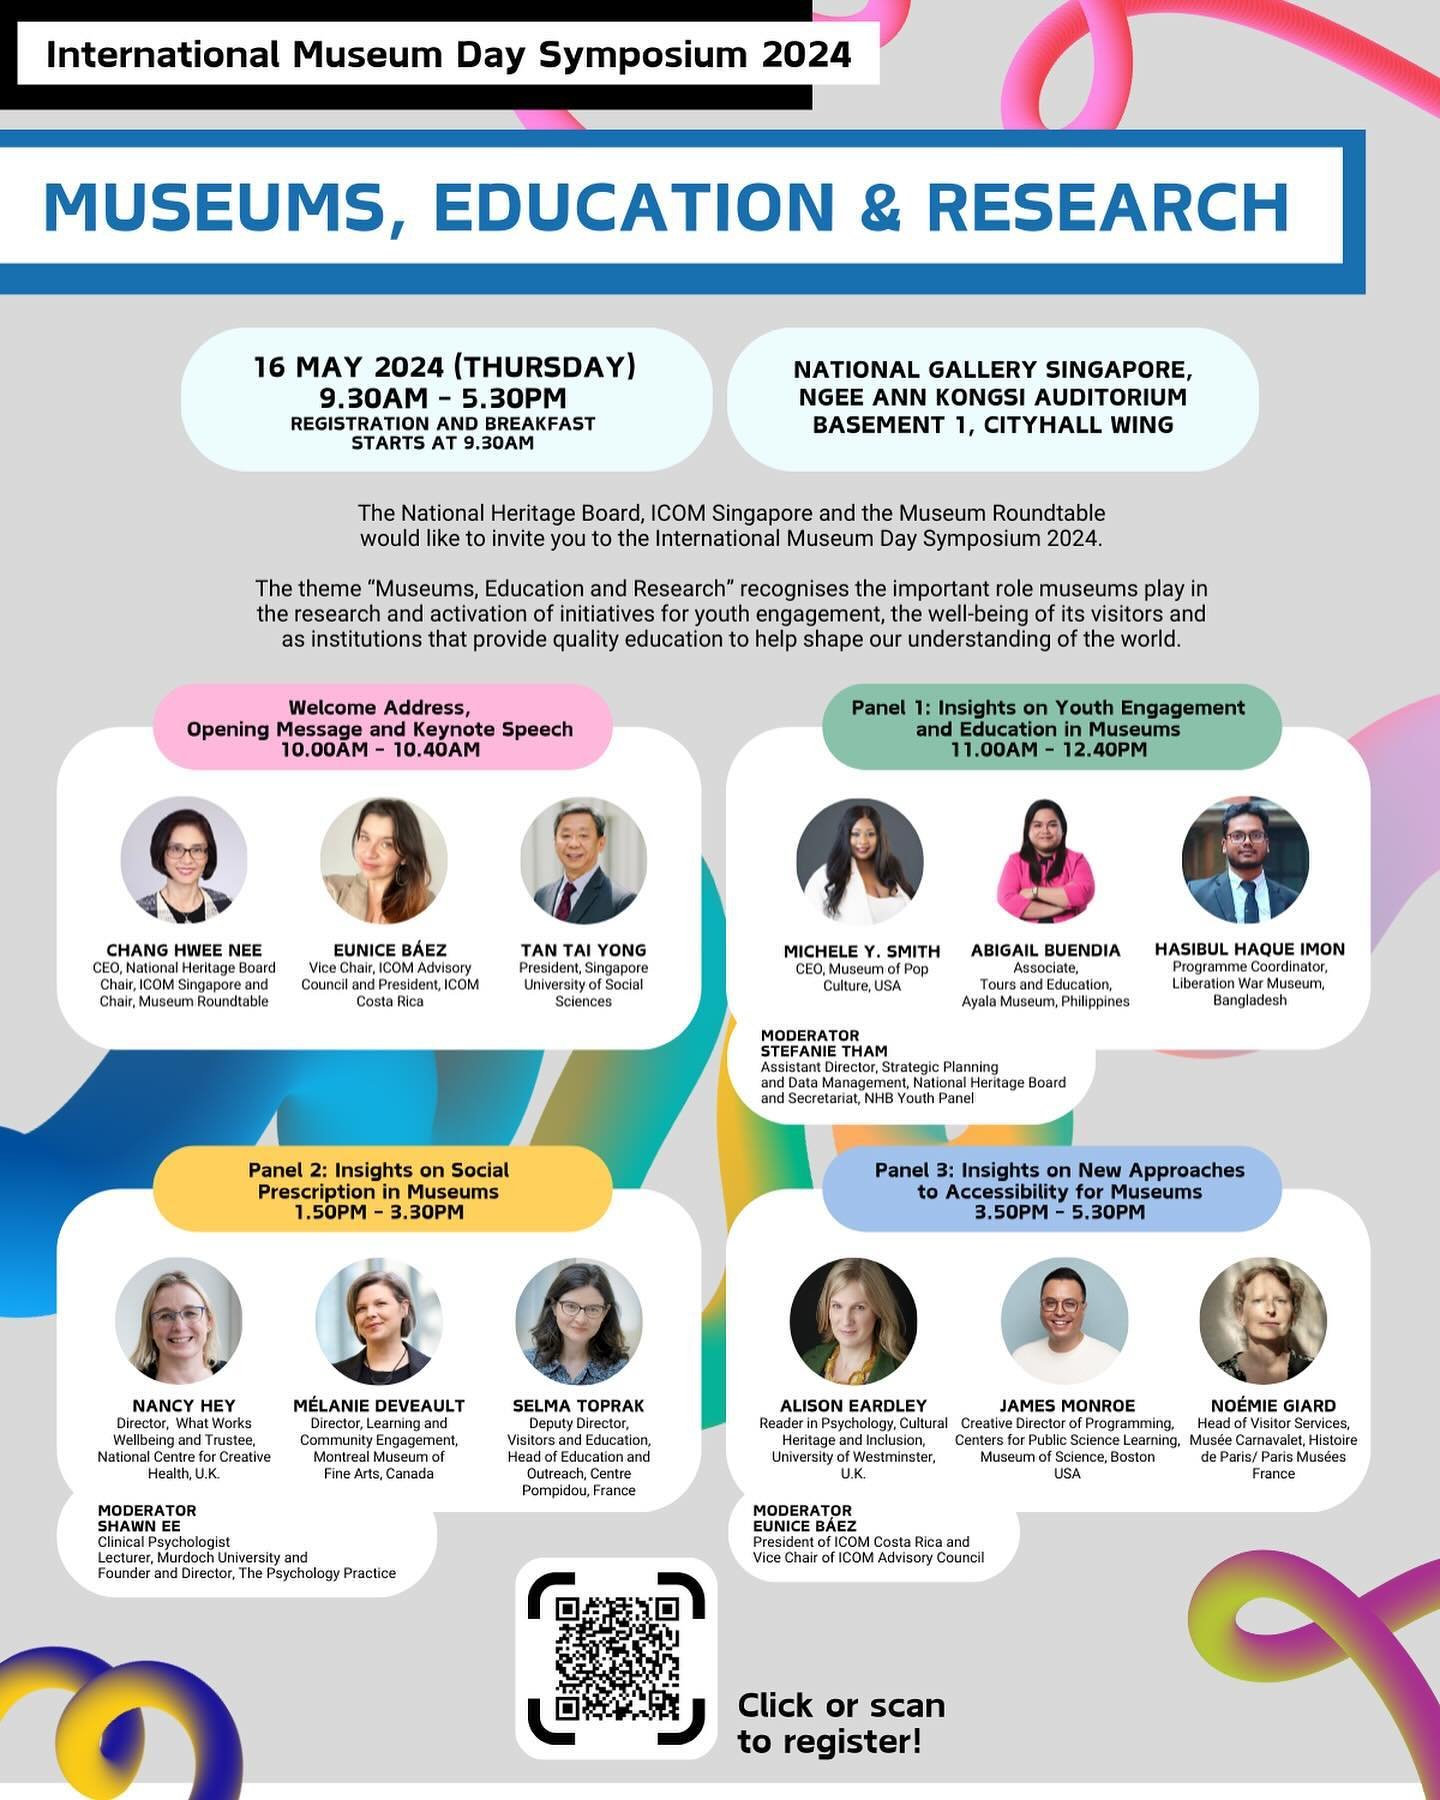 Join us today at the International Museum Day Symposium held at the National Gallery Singapore, jointly organised by the National Heritage Board, International Council of Museums (ICOM), and Museum Roundtable Singapore.

You can catch an interesting 